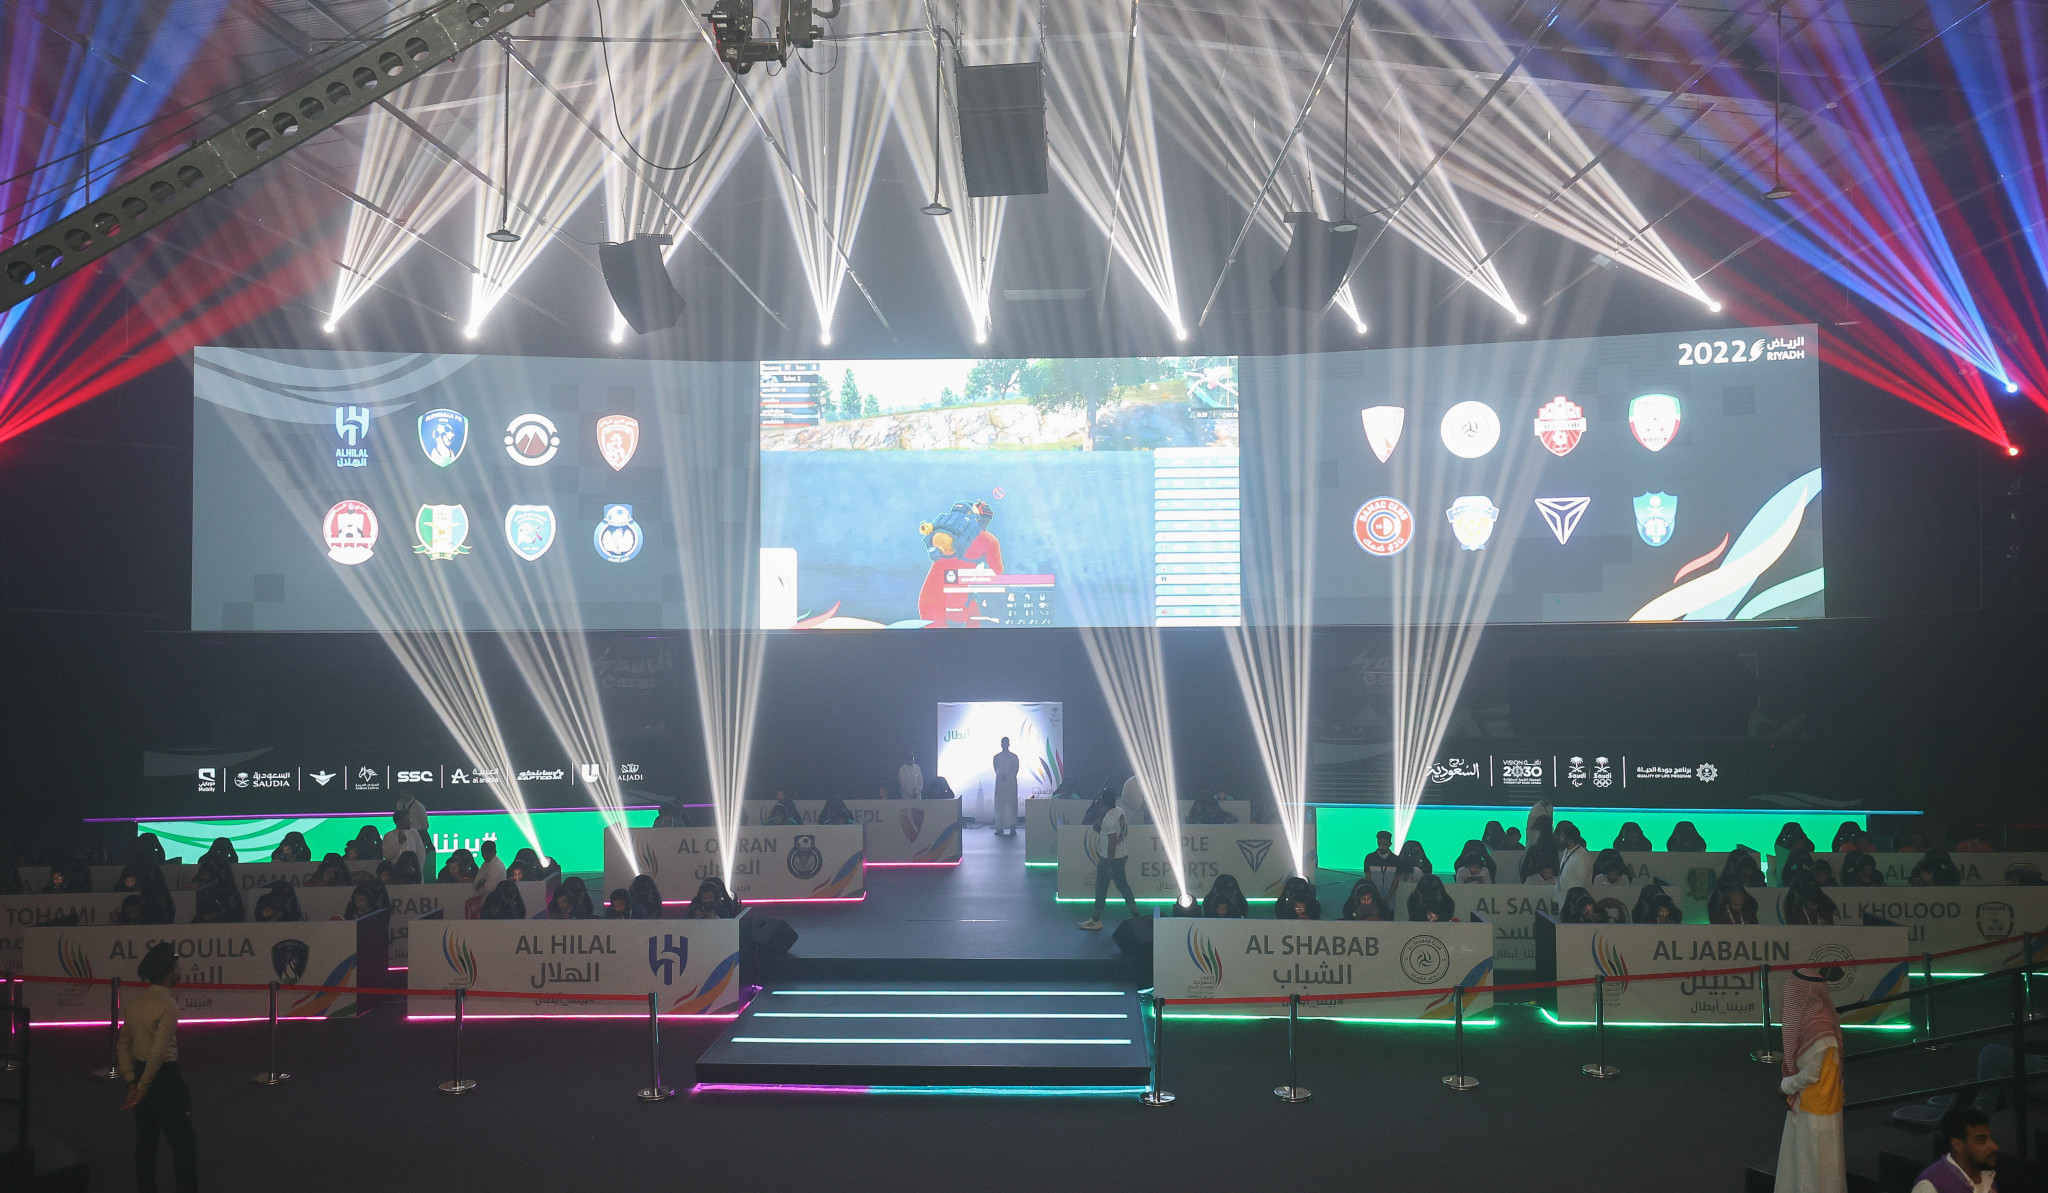 The first day of the PUGB team finals were held at the Saudi Media City ©Saudi Games